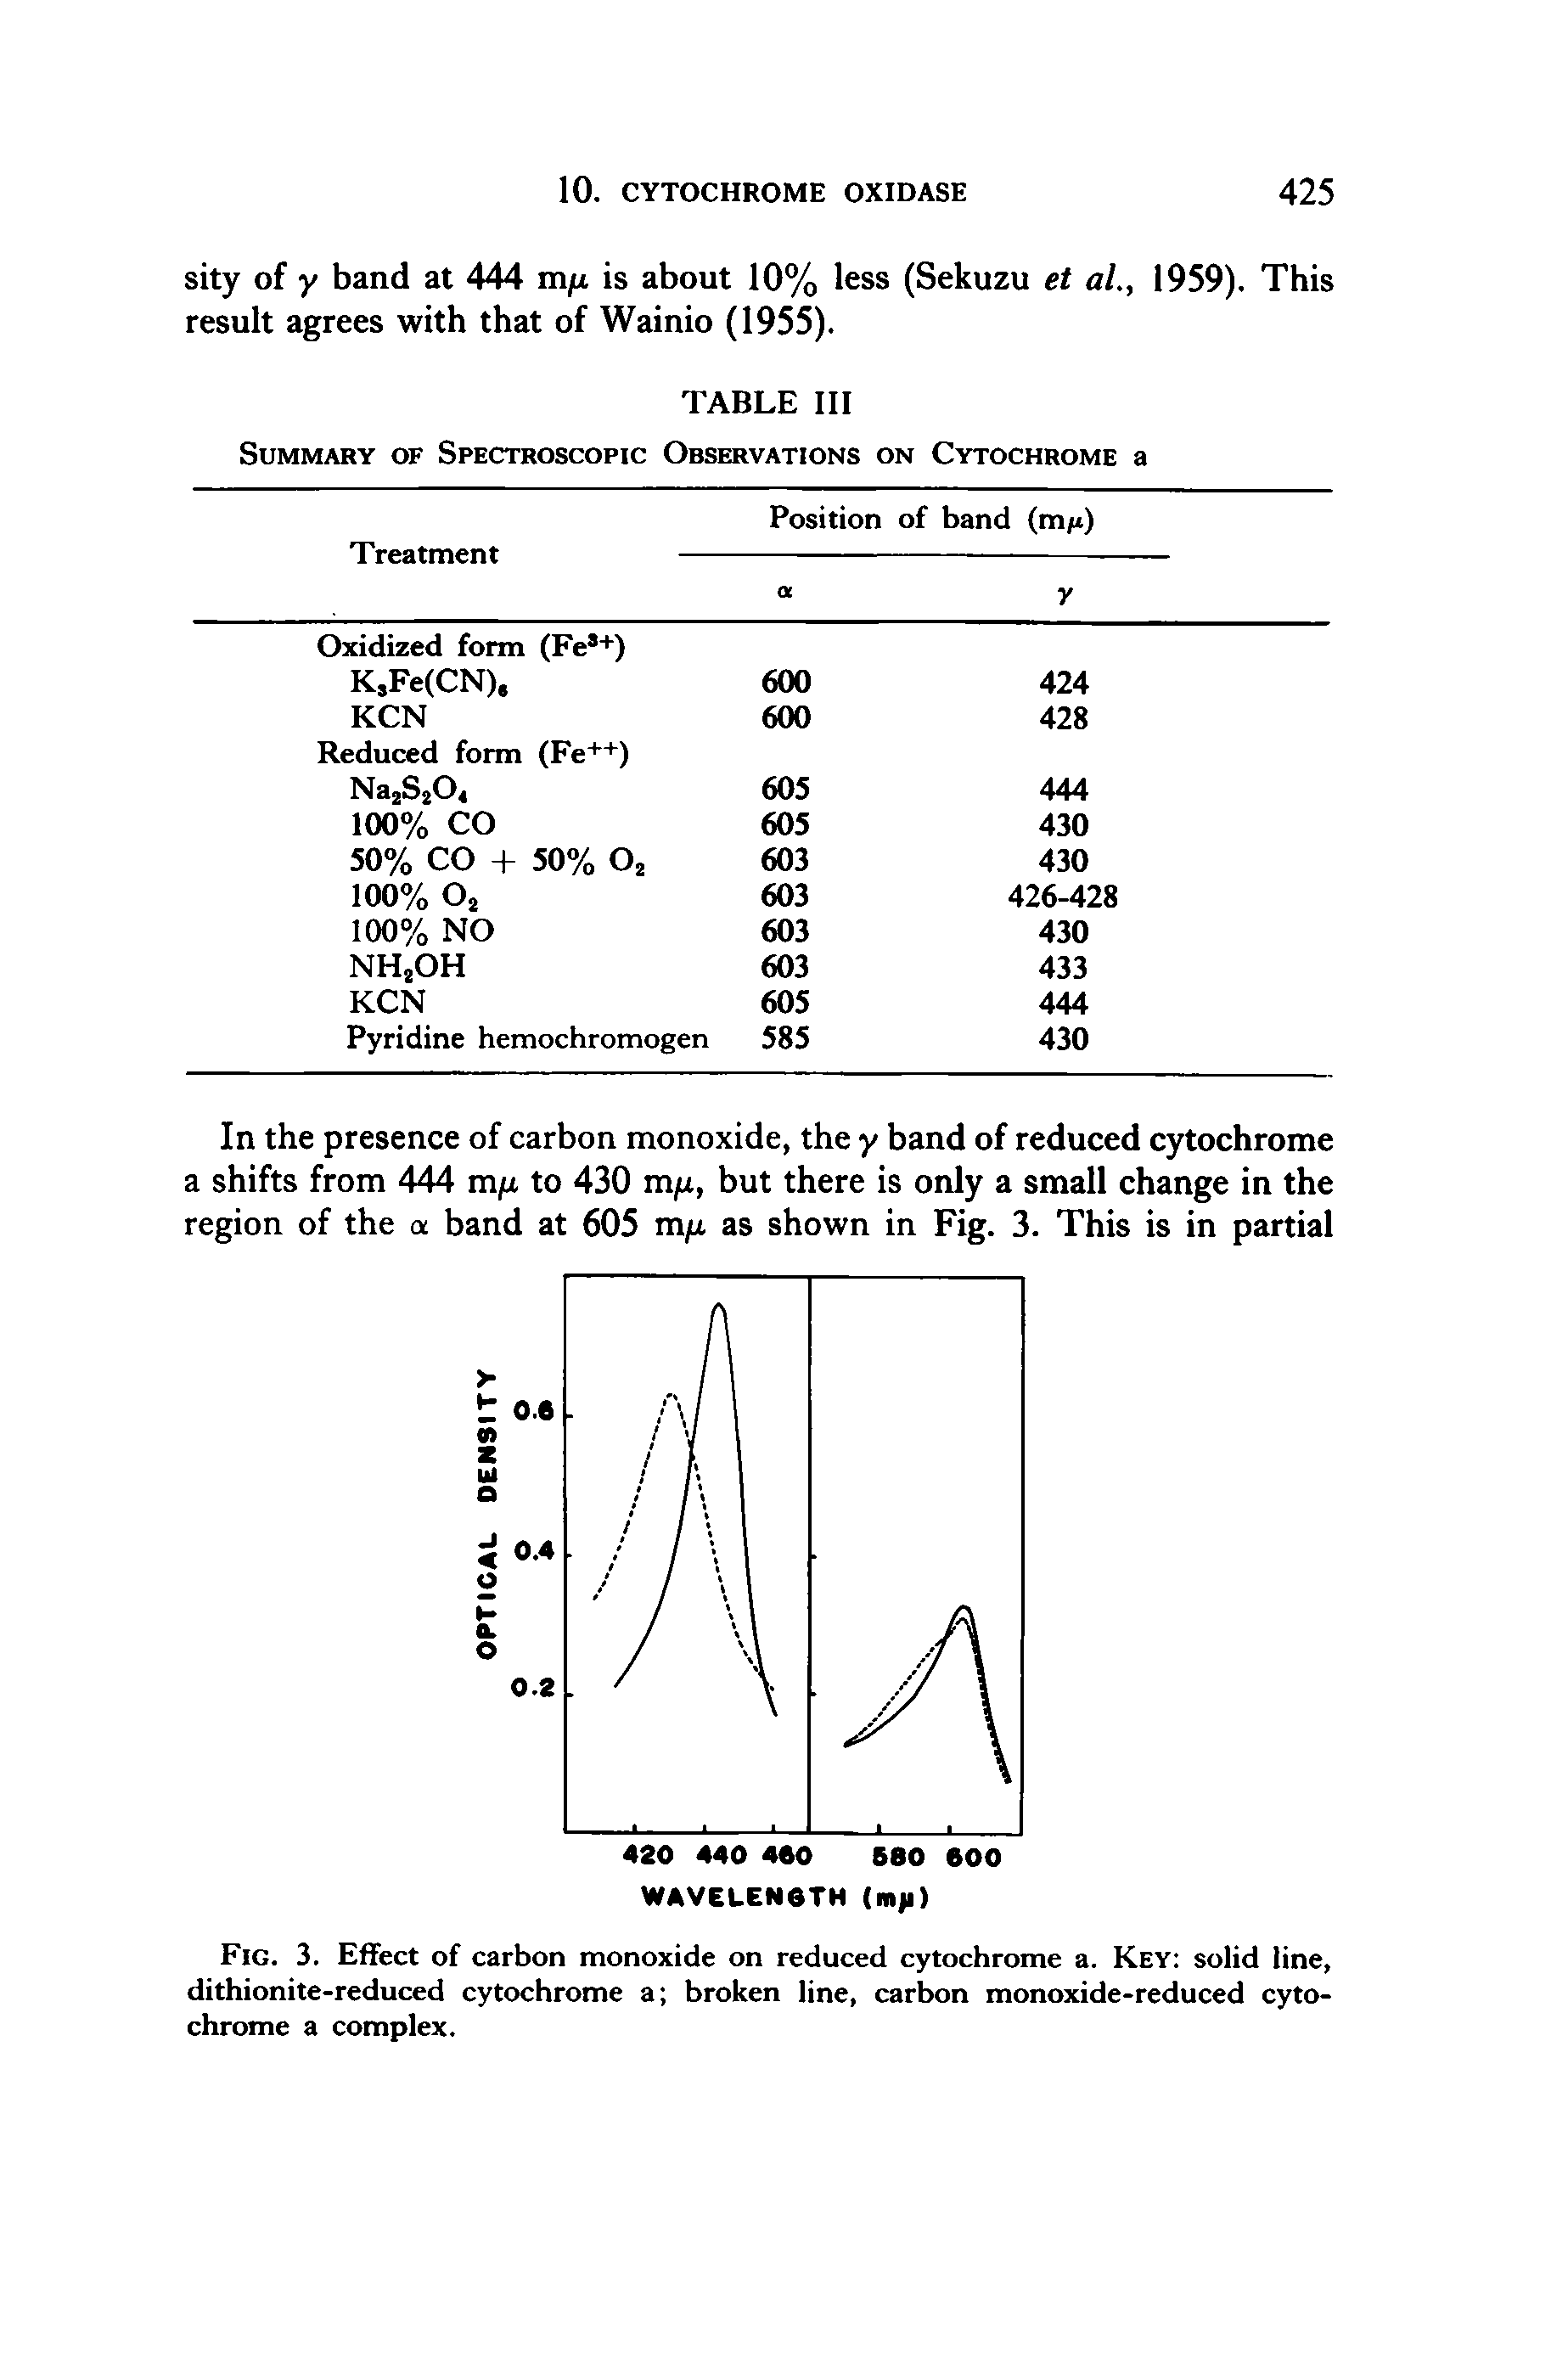 Fig. 3. Effect of carbon monoxide on reduced cytochrome a. Key solid line, dithionite-reduced cytochrome a broken line, carbon monoxide-reduced cytochrome a complex.